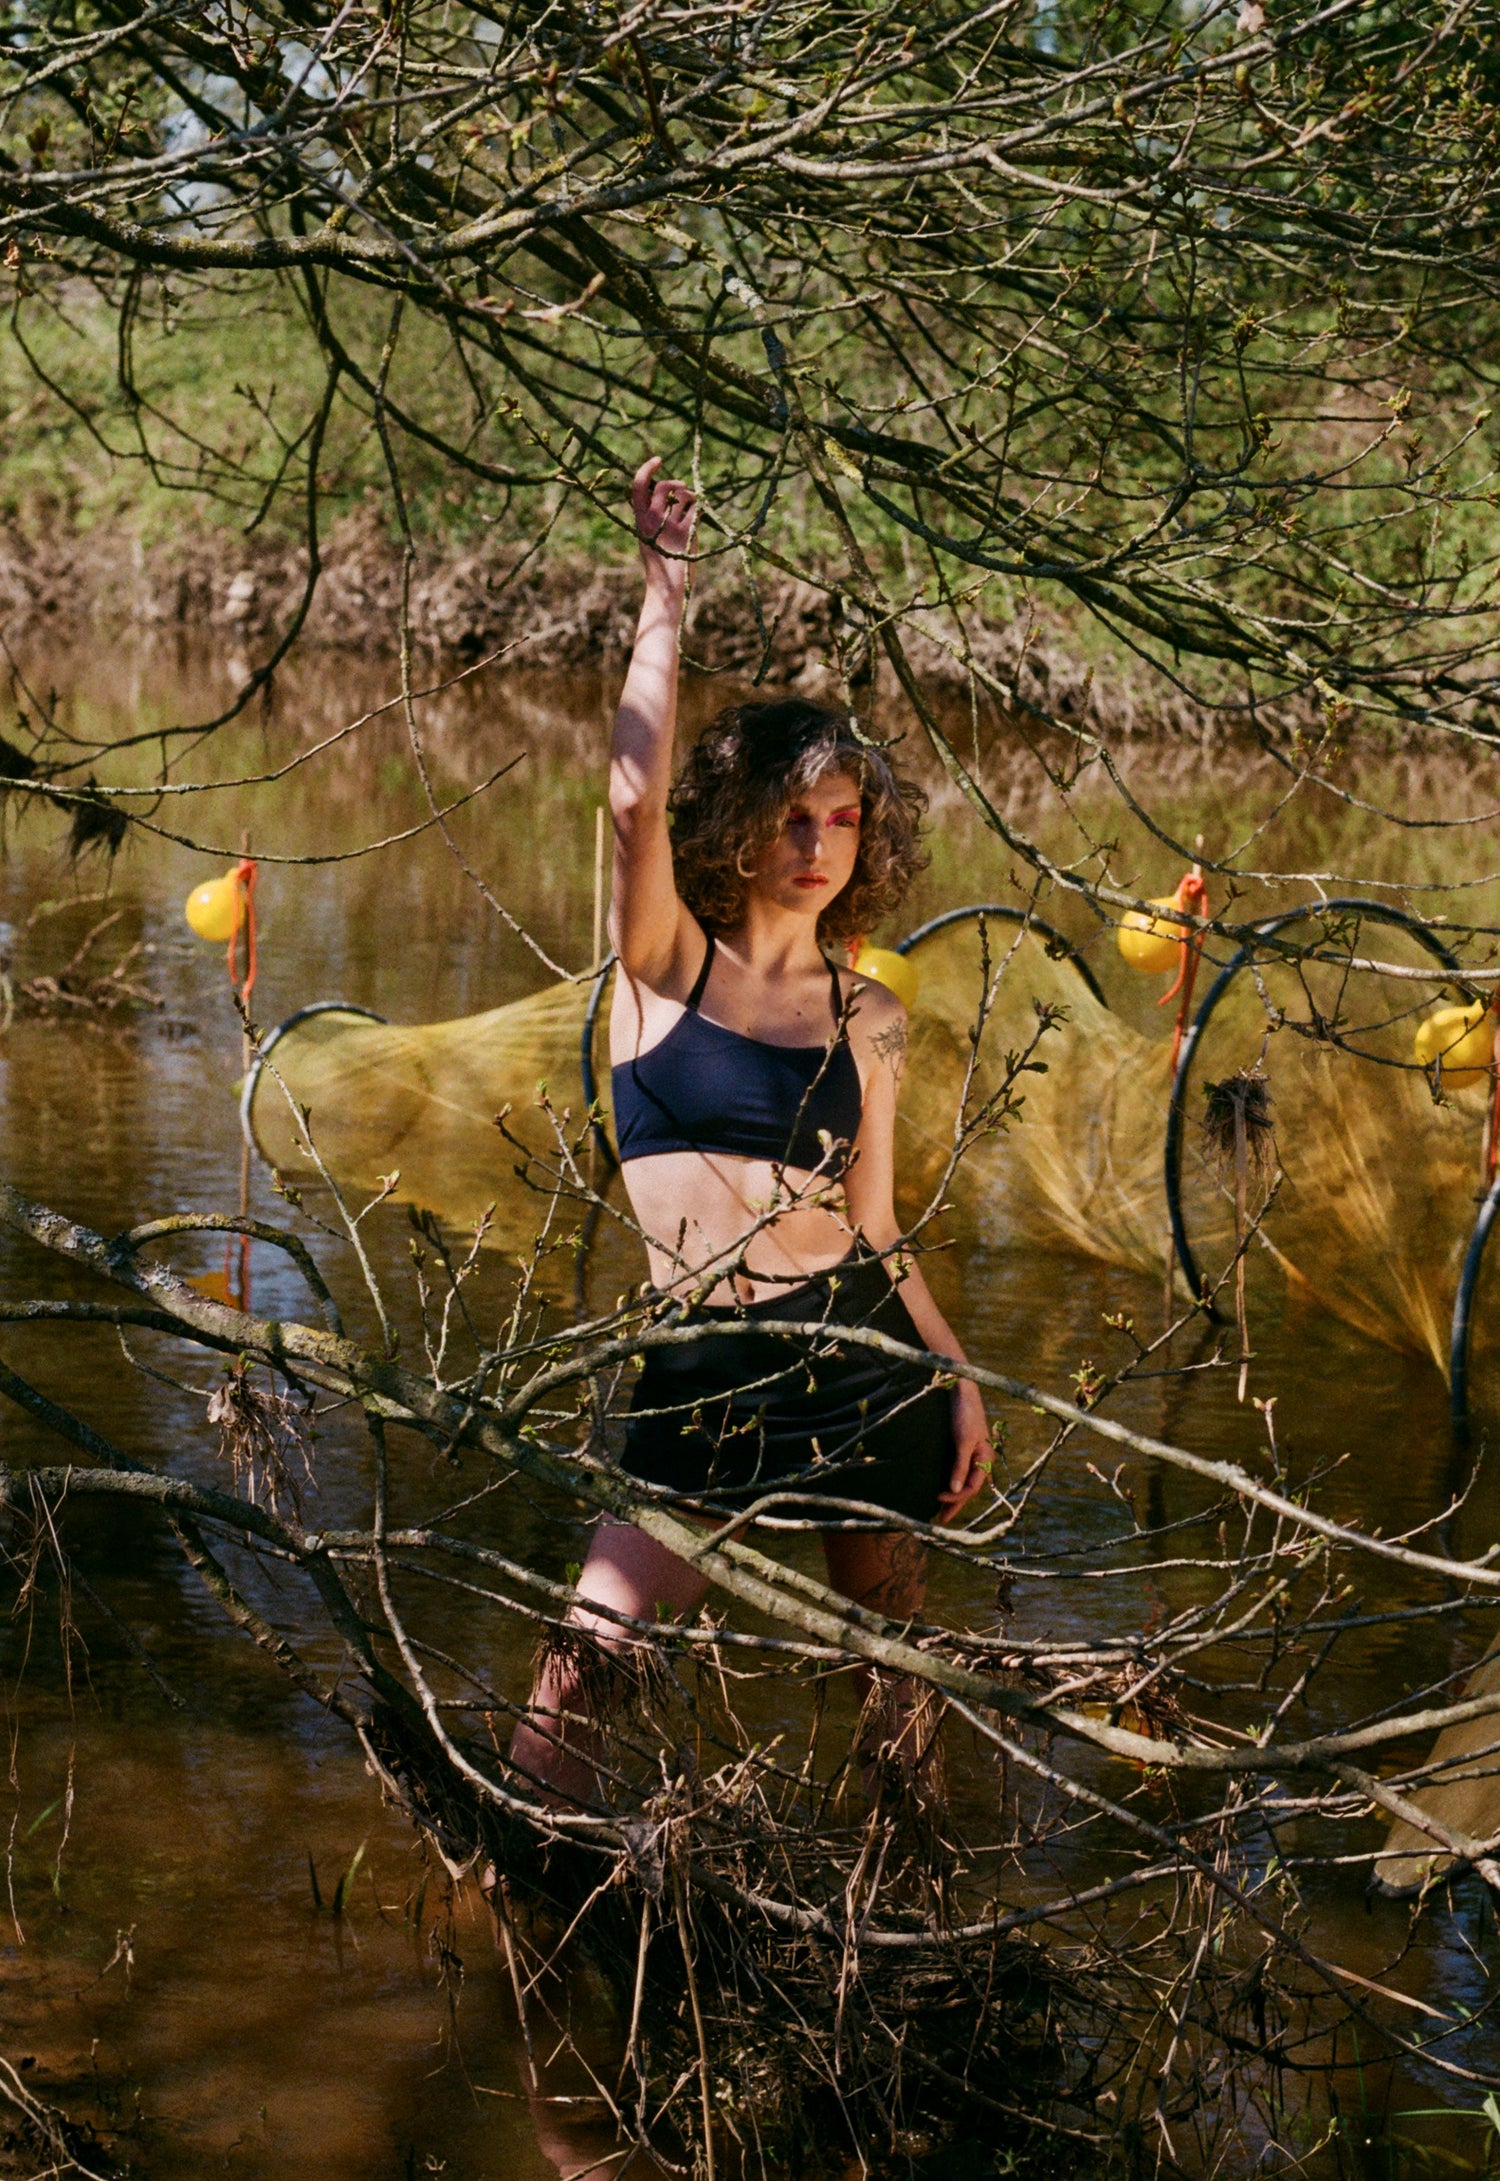 Ximena wears a prosthetic swim top and swim skirt while she poses in the water, she is holding onto branches